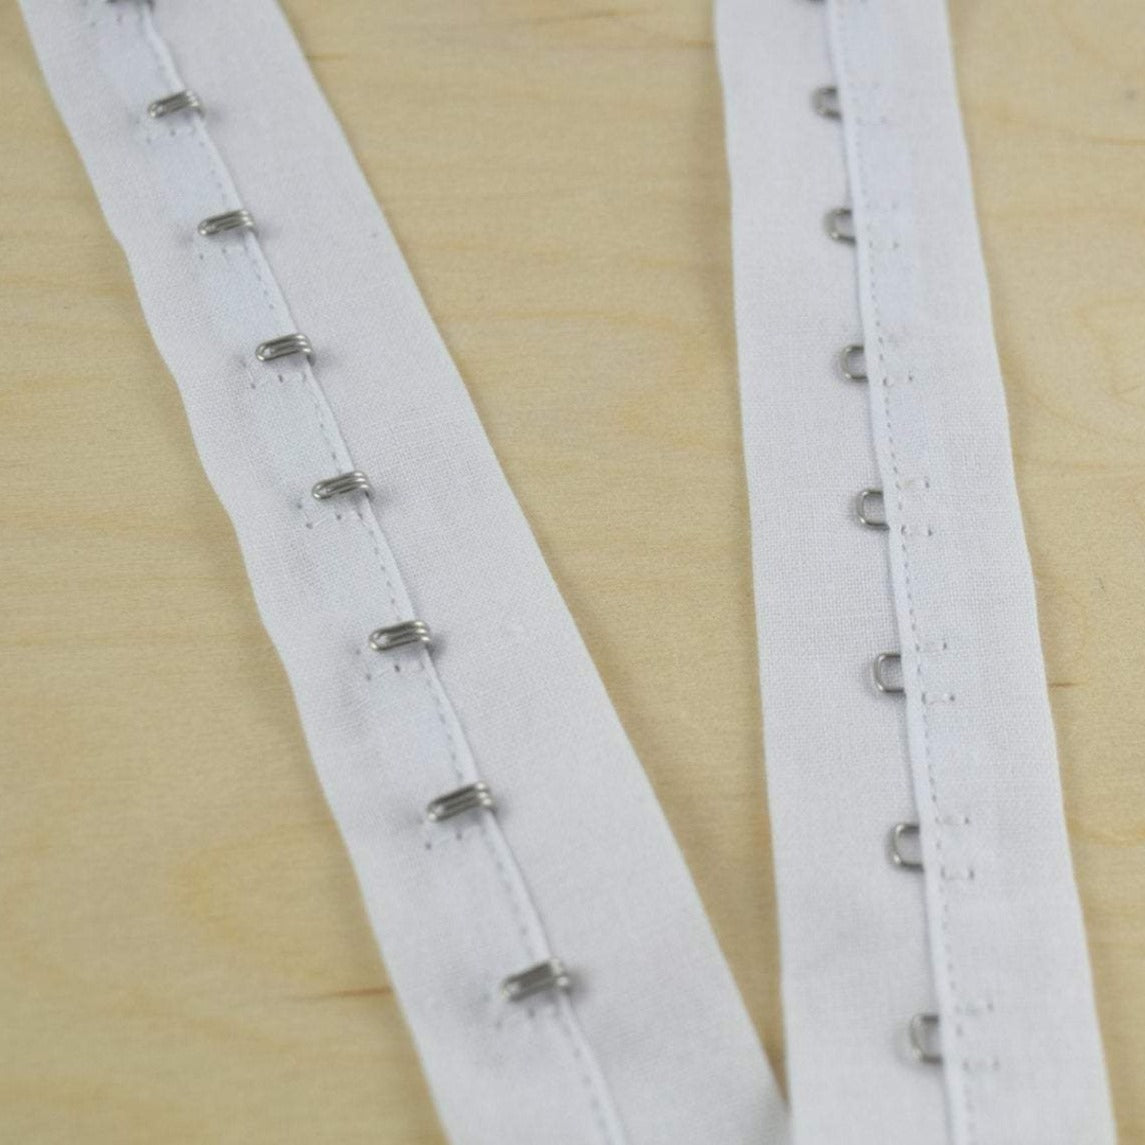 Continuous 3 Row Hook and Eye Tape, by the 1/4 Yard Increments